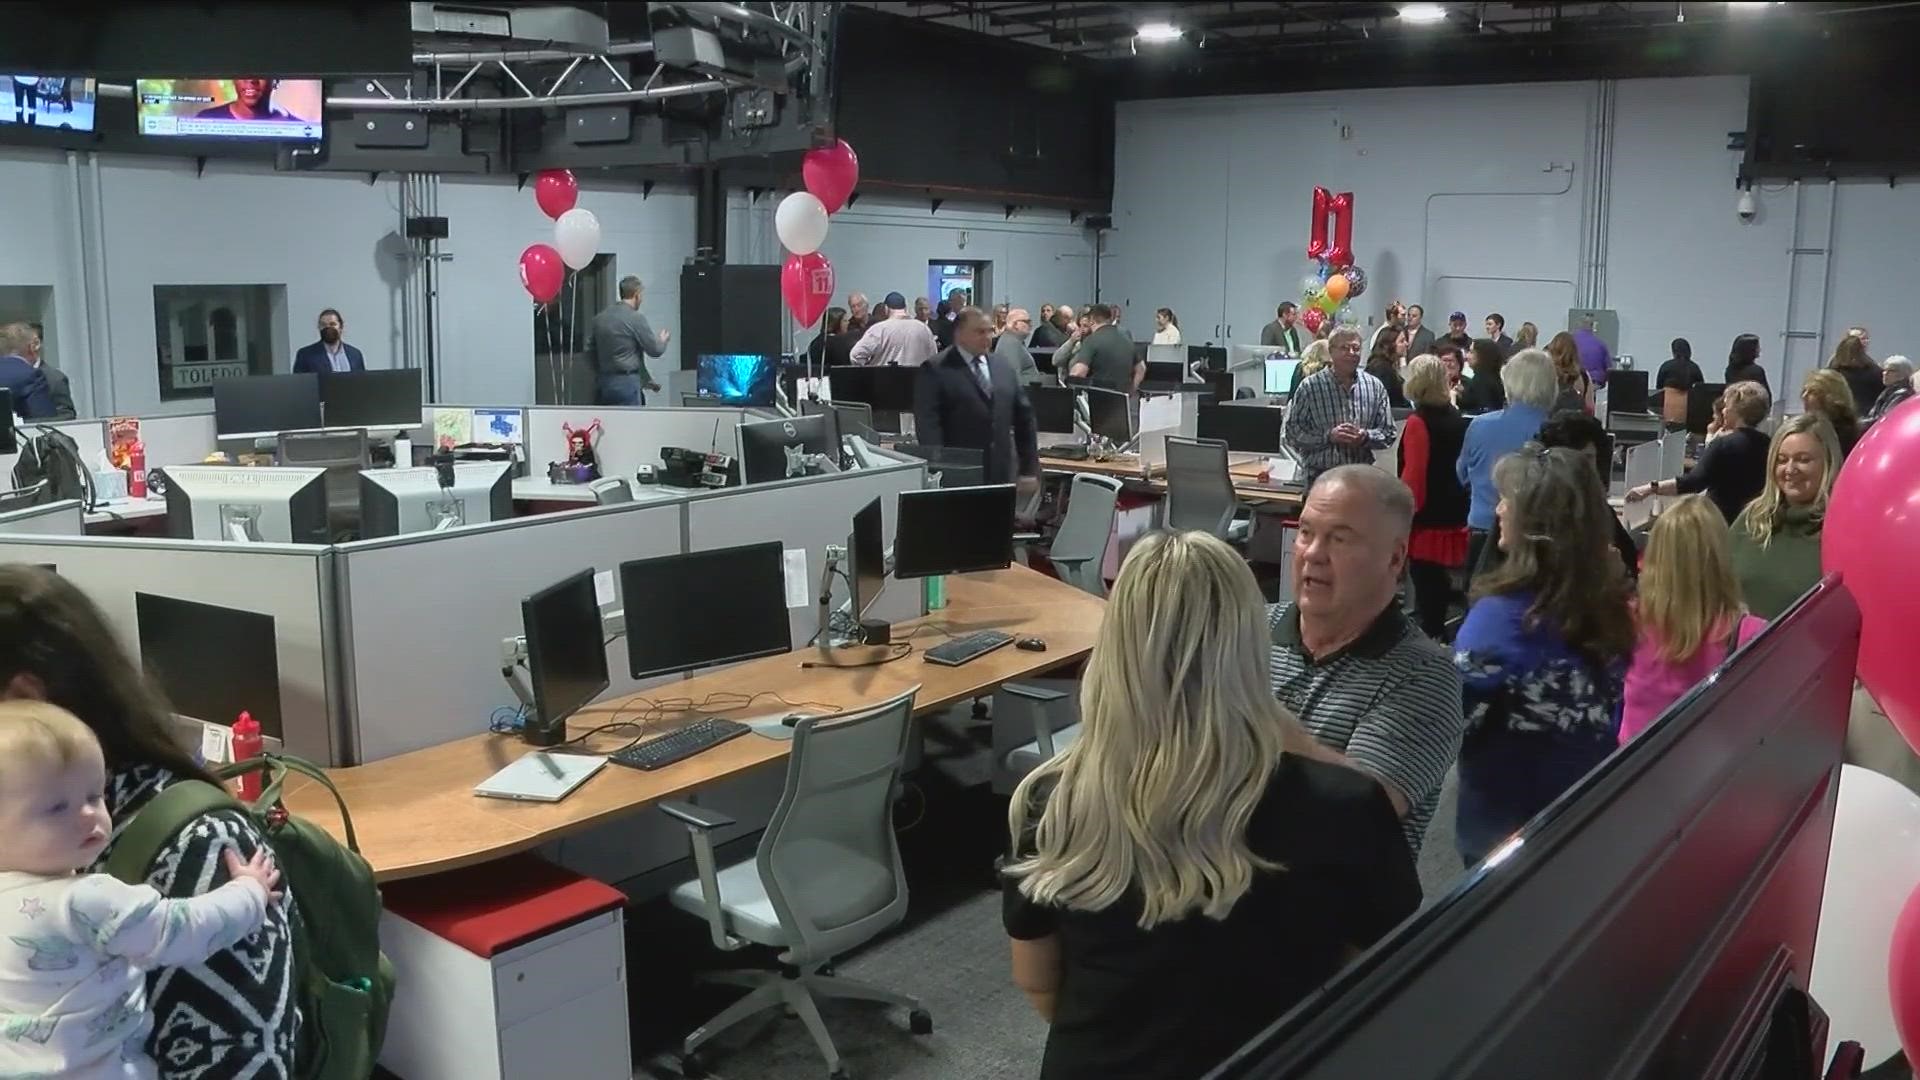 Toledo's news leader hosted a ribbon-cutting for its state-of-the-art newsroom at the only news station in downtown Toledo on Wednesday.